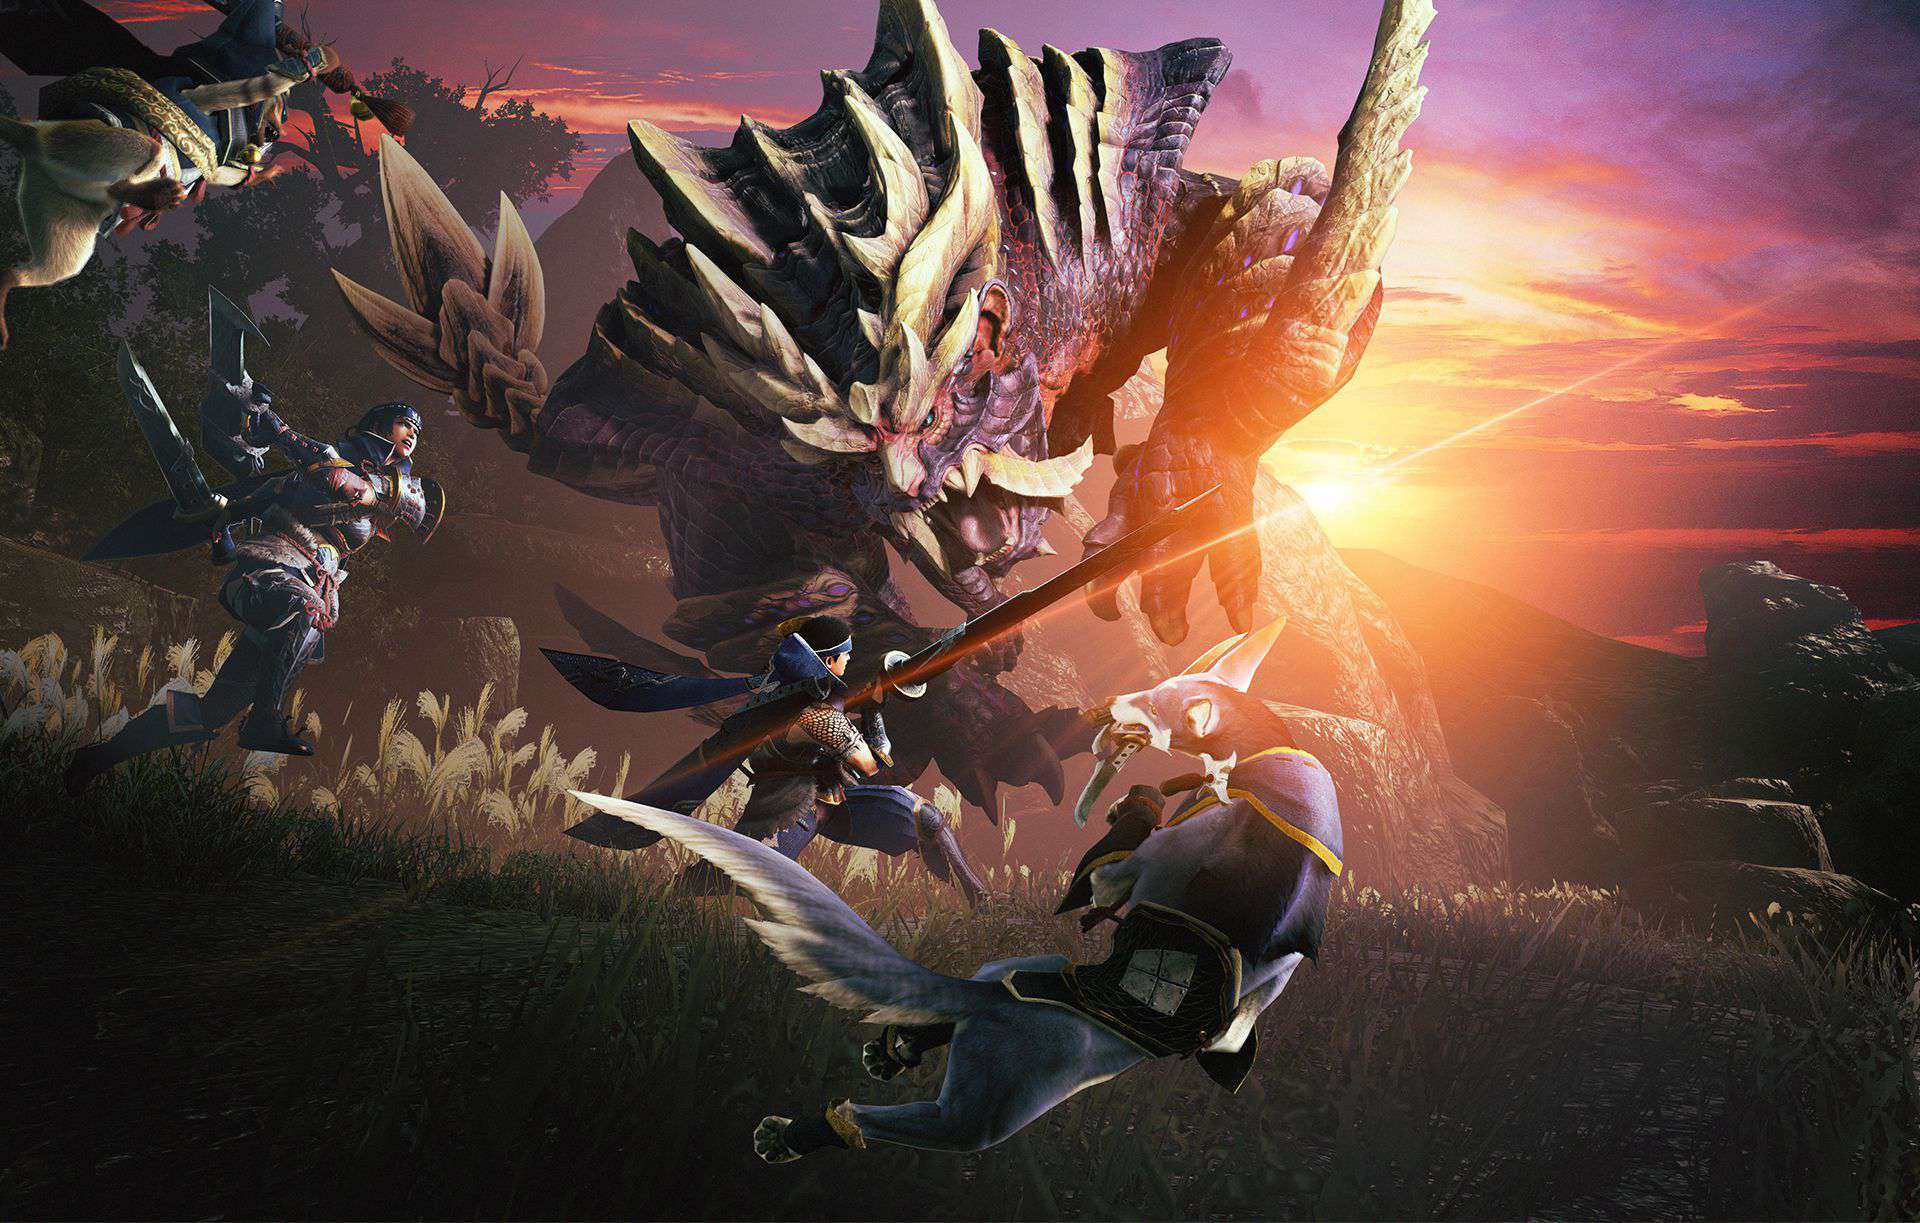 Image for Annual Monster Hunter concert to stream online later this month